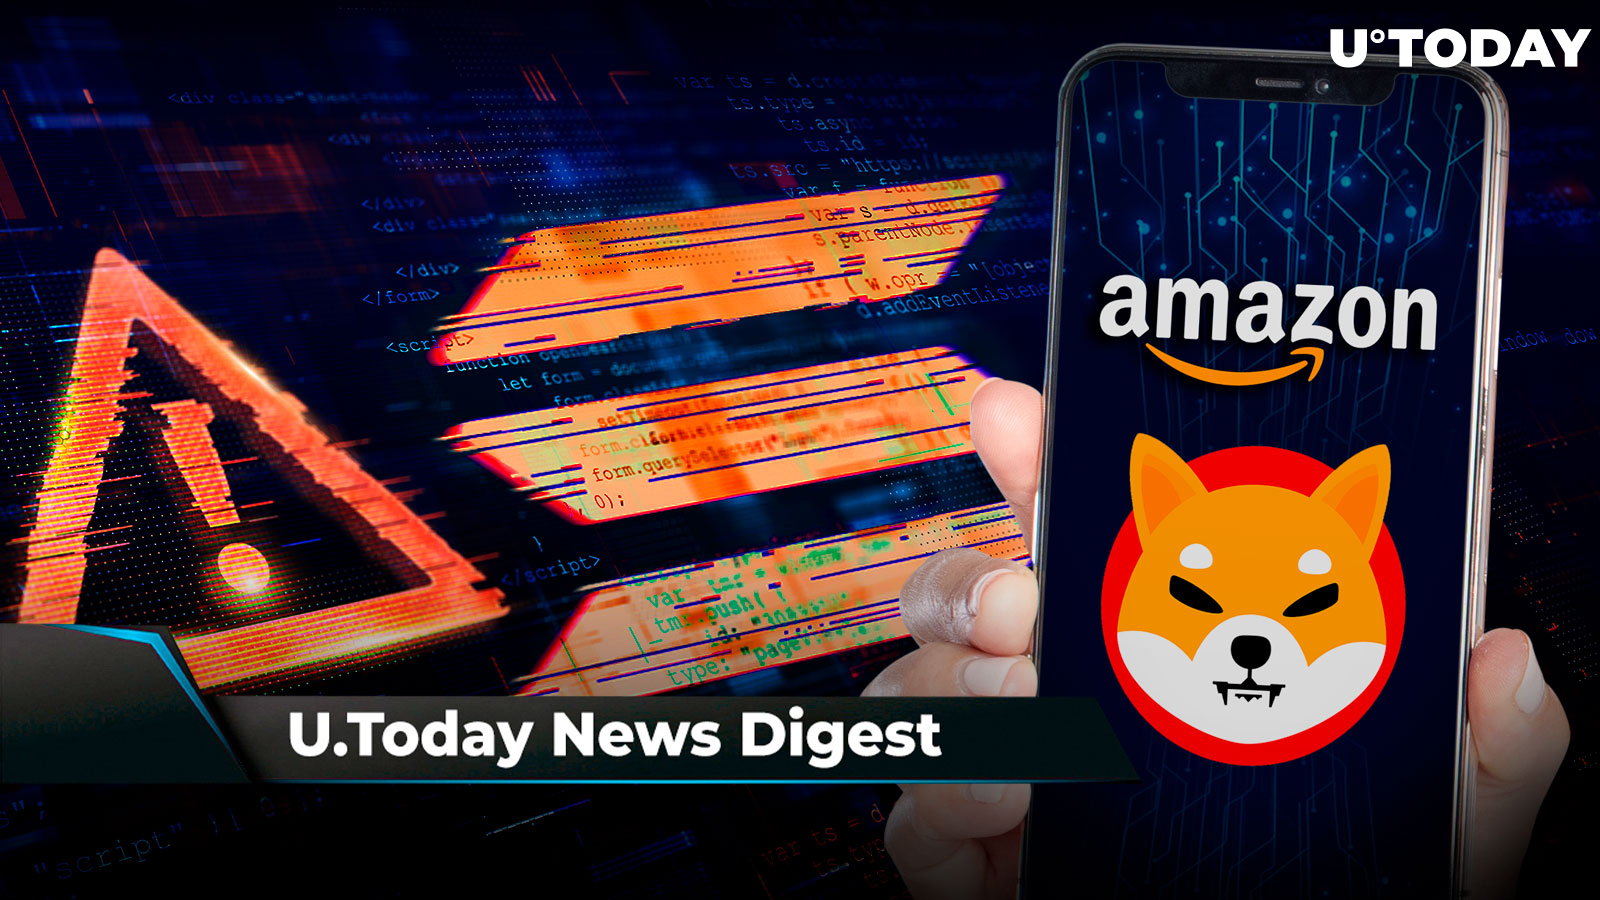 Amazon Called SHIB “Solid Daily Burner”, Cardano Founder “Facepalms” Solana Hack, Japan’s Bitbank Now Supports DOGE and DOT: Crypto News Digest by U.Today